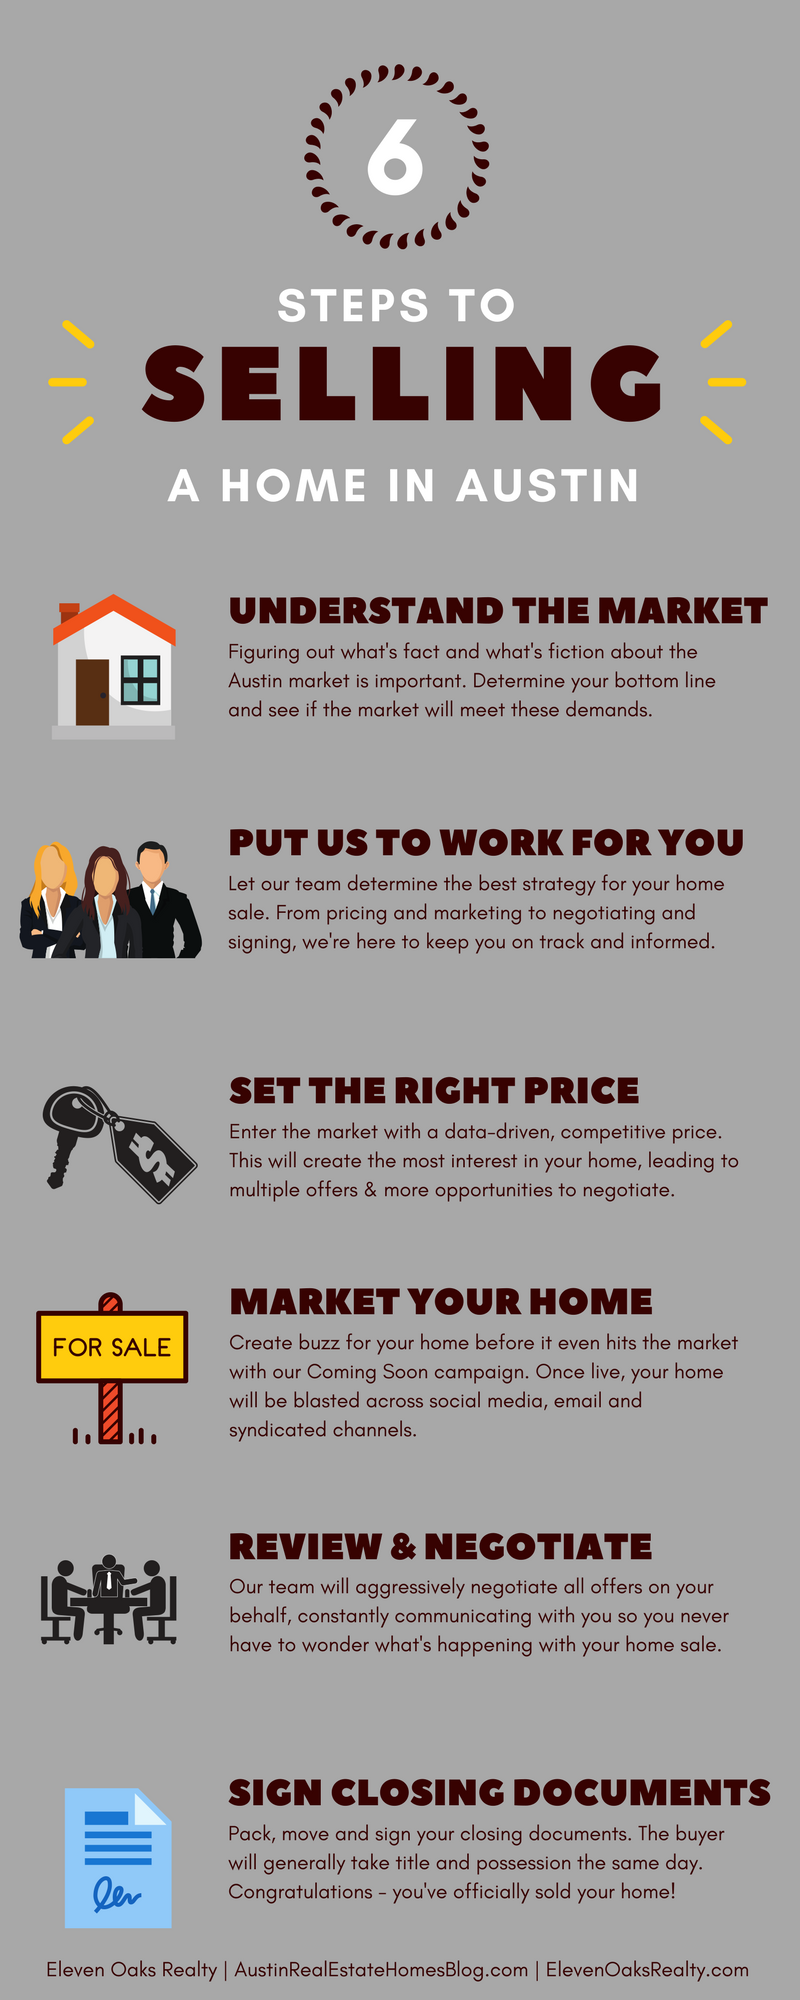 steps to Selling a Home in Austin